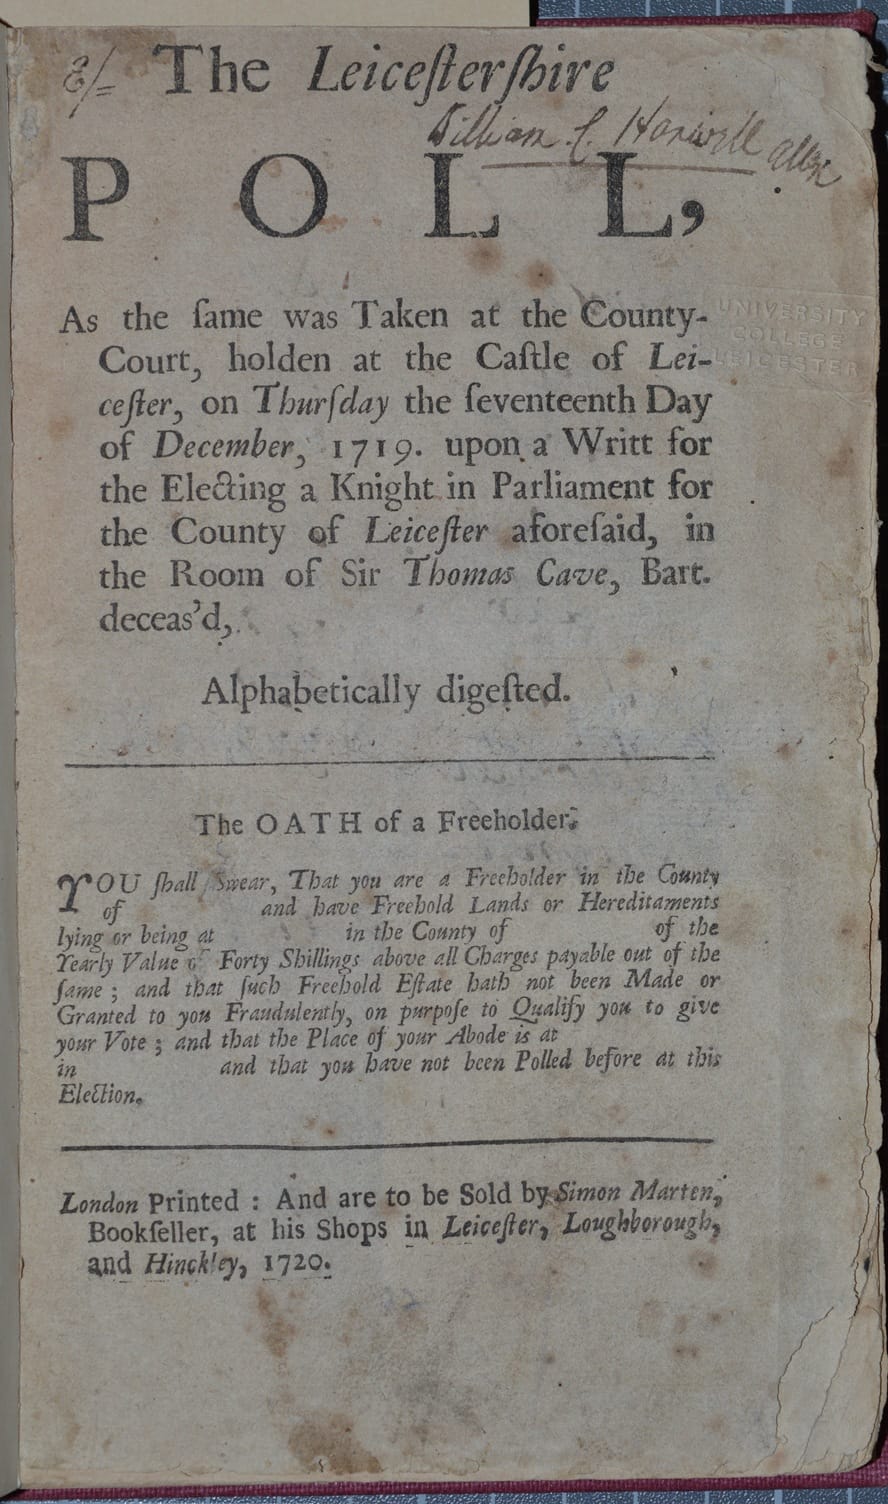 Title reads "Leicestershire poll book." It is mostly in old English.